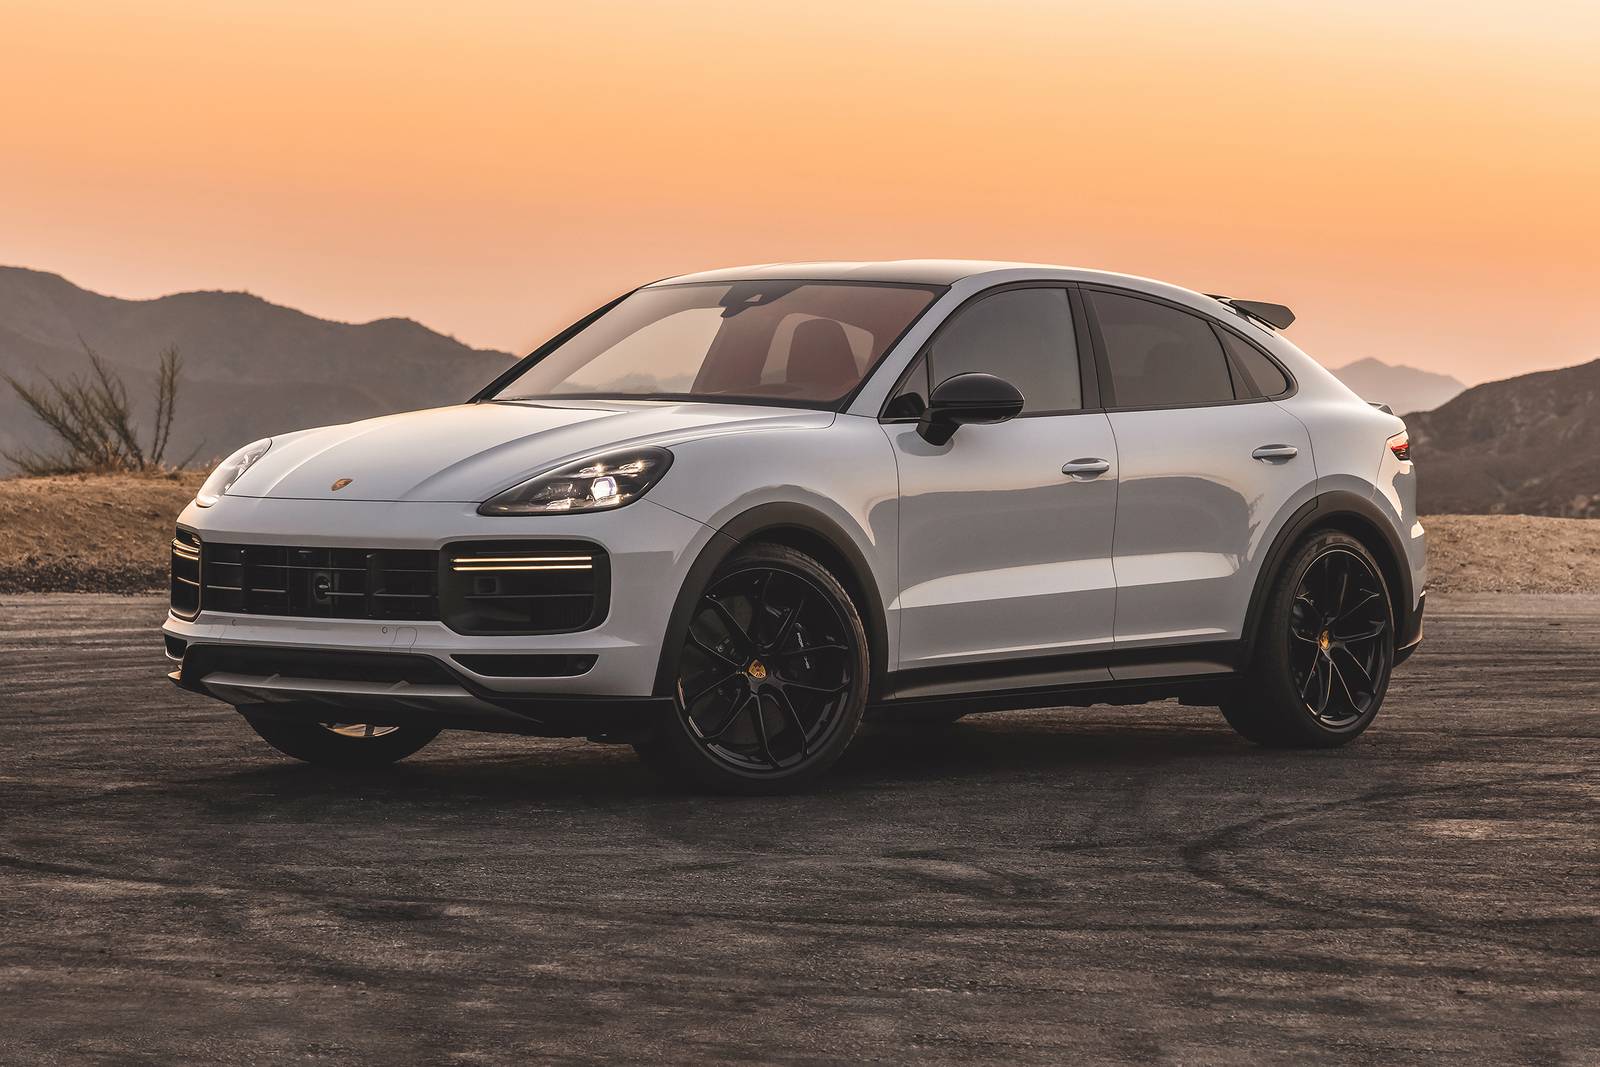 2022 Porsche Cayenne Coupe Prices, Reviews, and Pictures | Edmunds